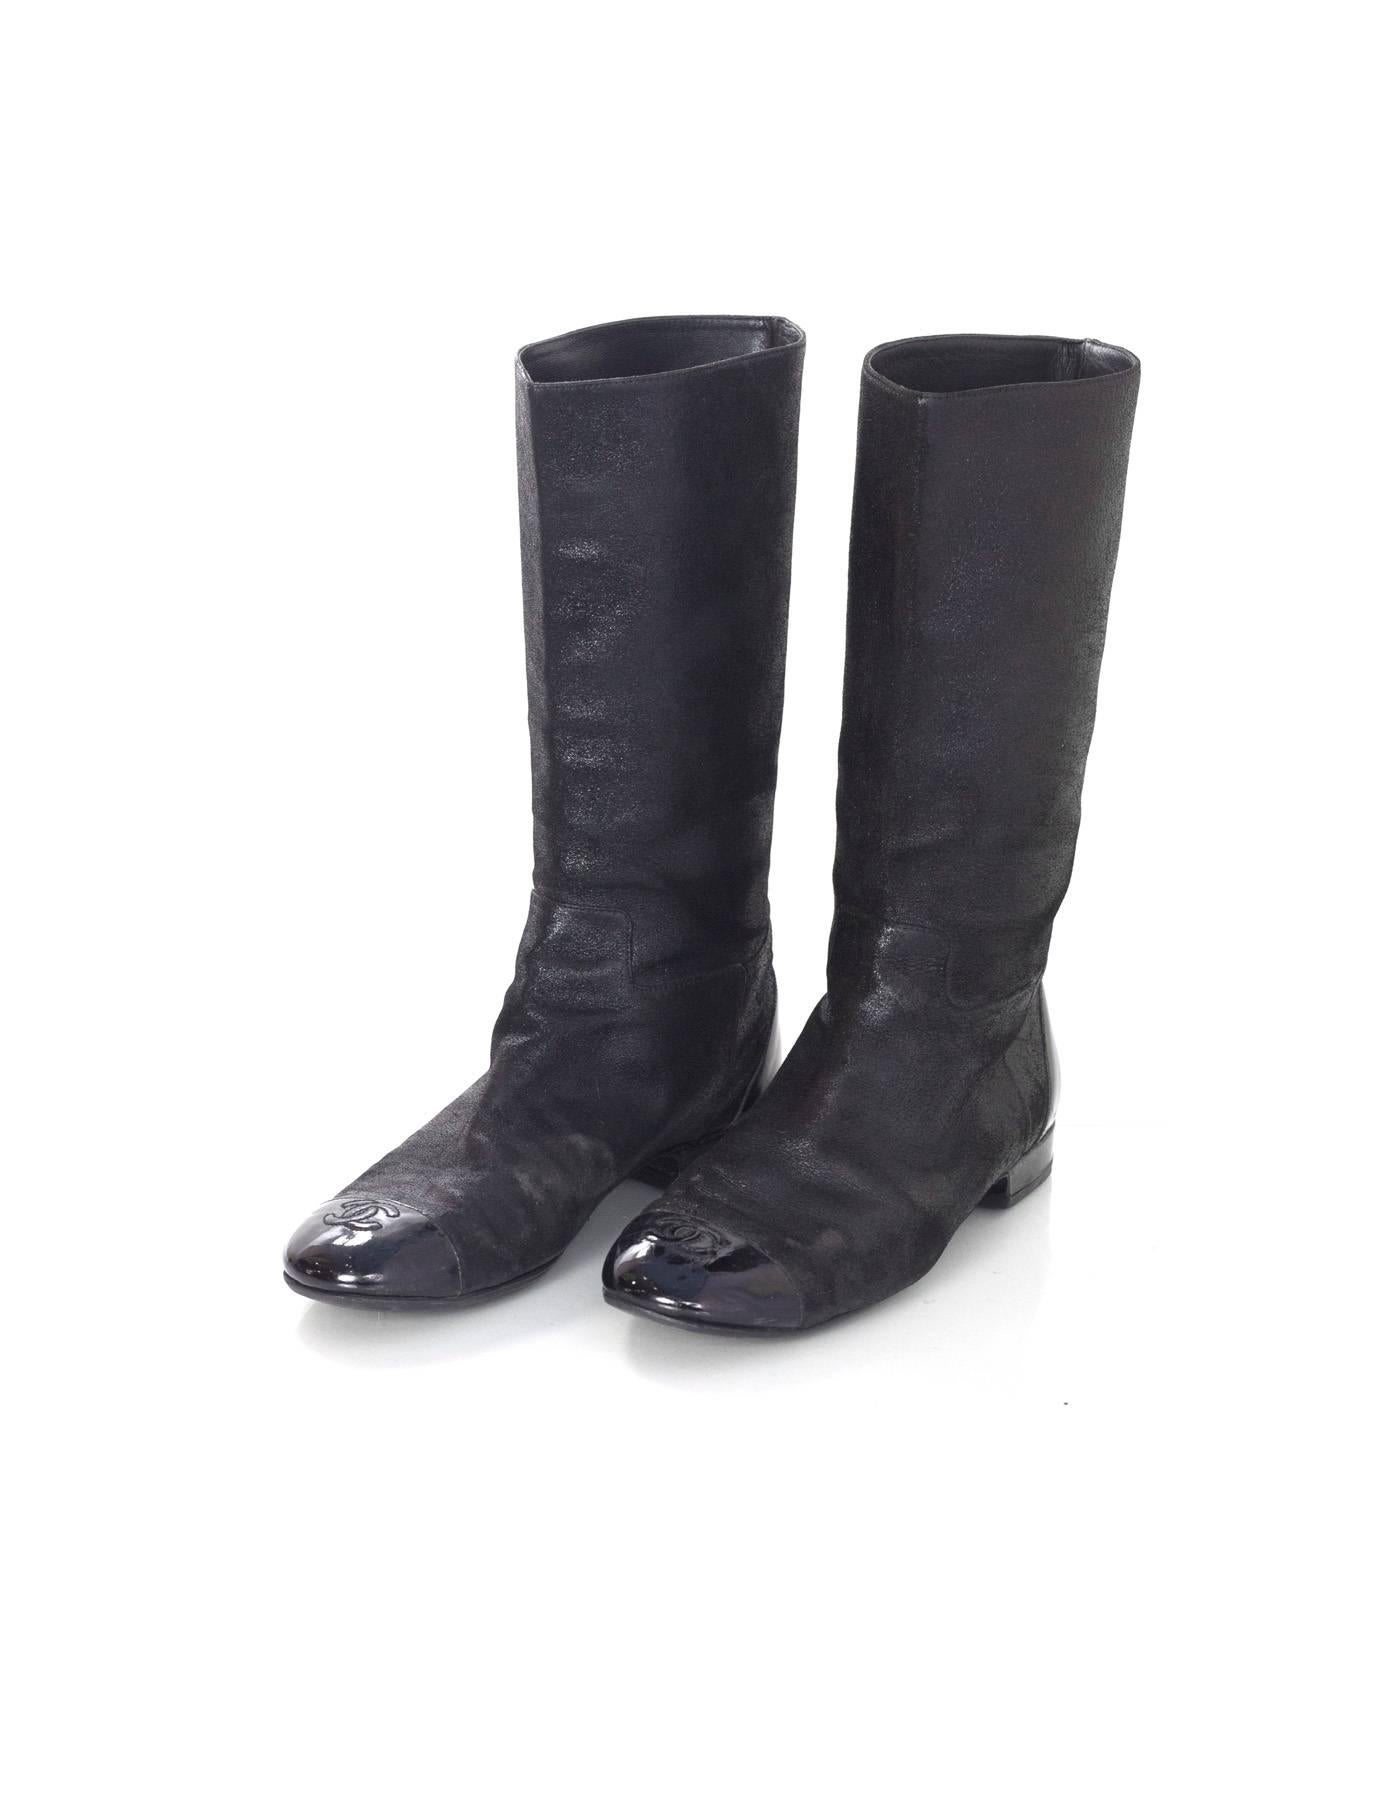 Chanel Black Iridescent Sueded Leather Boots
Features patent toe cap with CC stitched on top

Made In: Italy
Color: Iridescent black
Materials: Sueded leather and patent leather
Closure/Opening: Pull on
Sole Stamp: Made in Italy 38
Overall